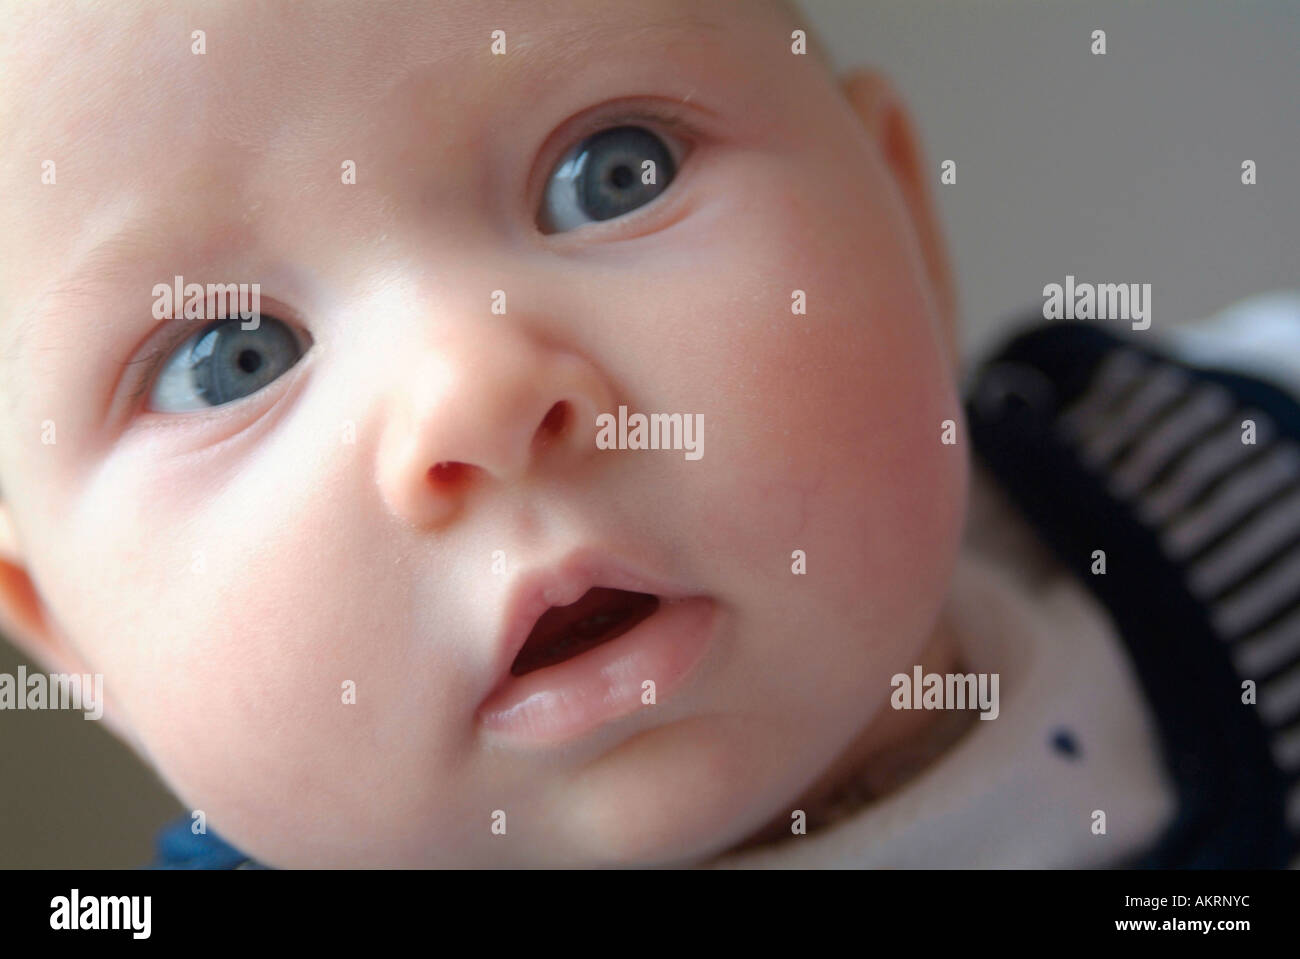 portrait of a baby of 6 months Stock Photo